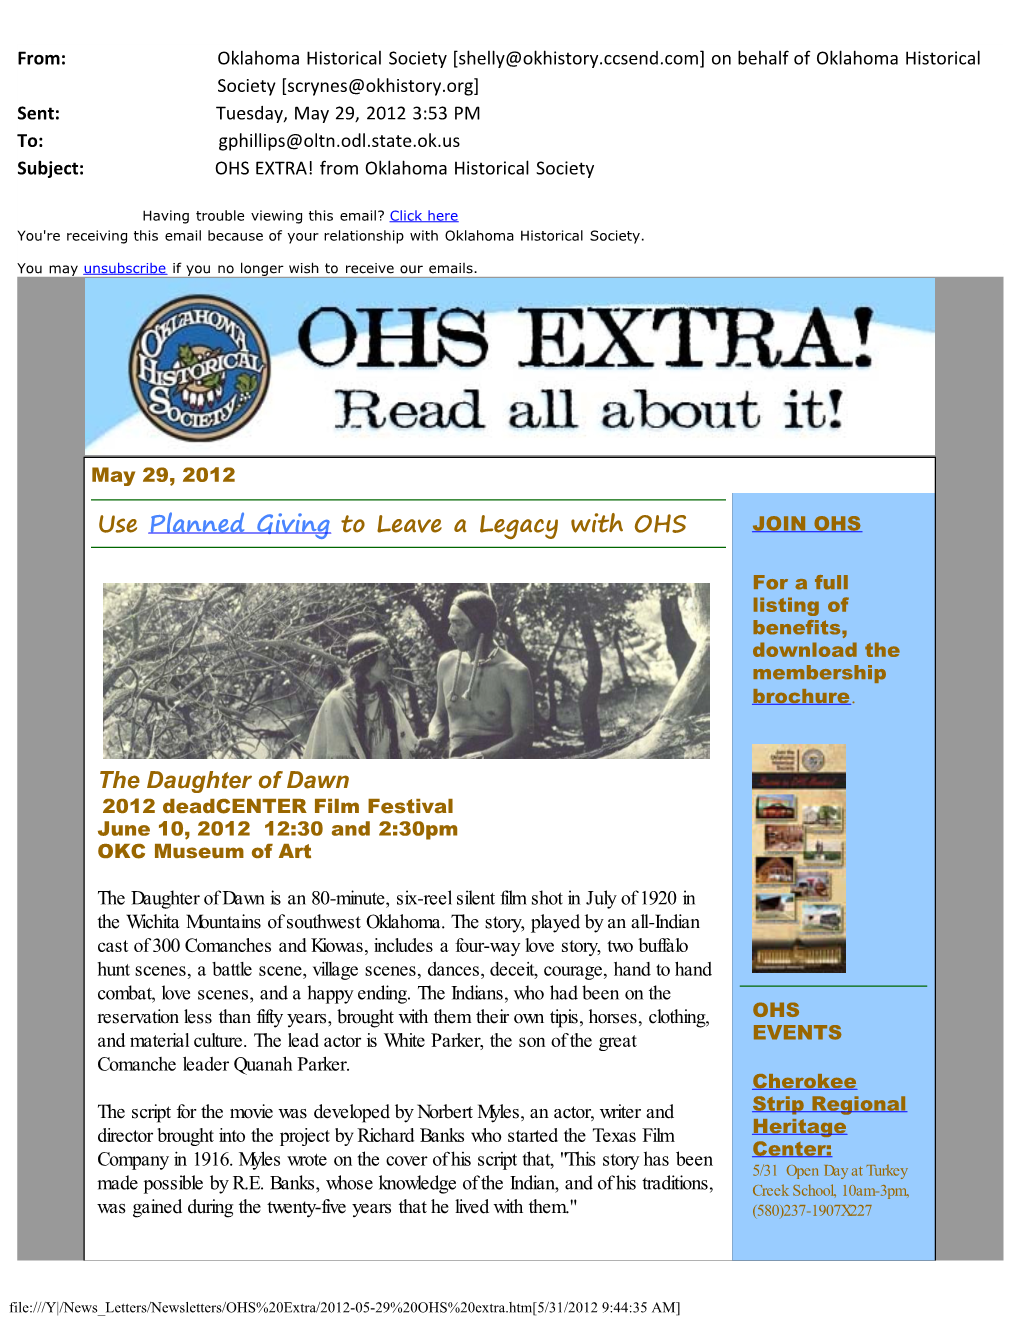 Y:\News Letters\Newsletters\OHS Extra\2012-05-29 OHS Extra.Htm